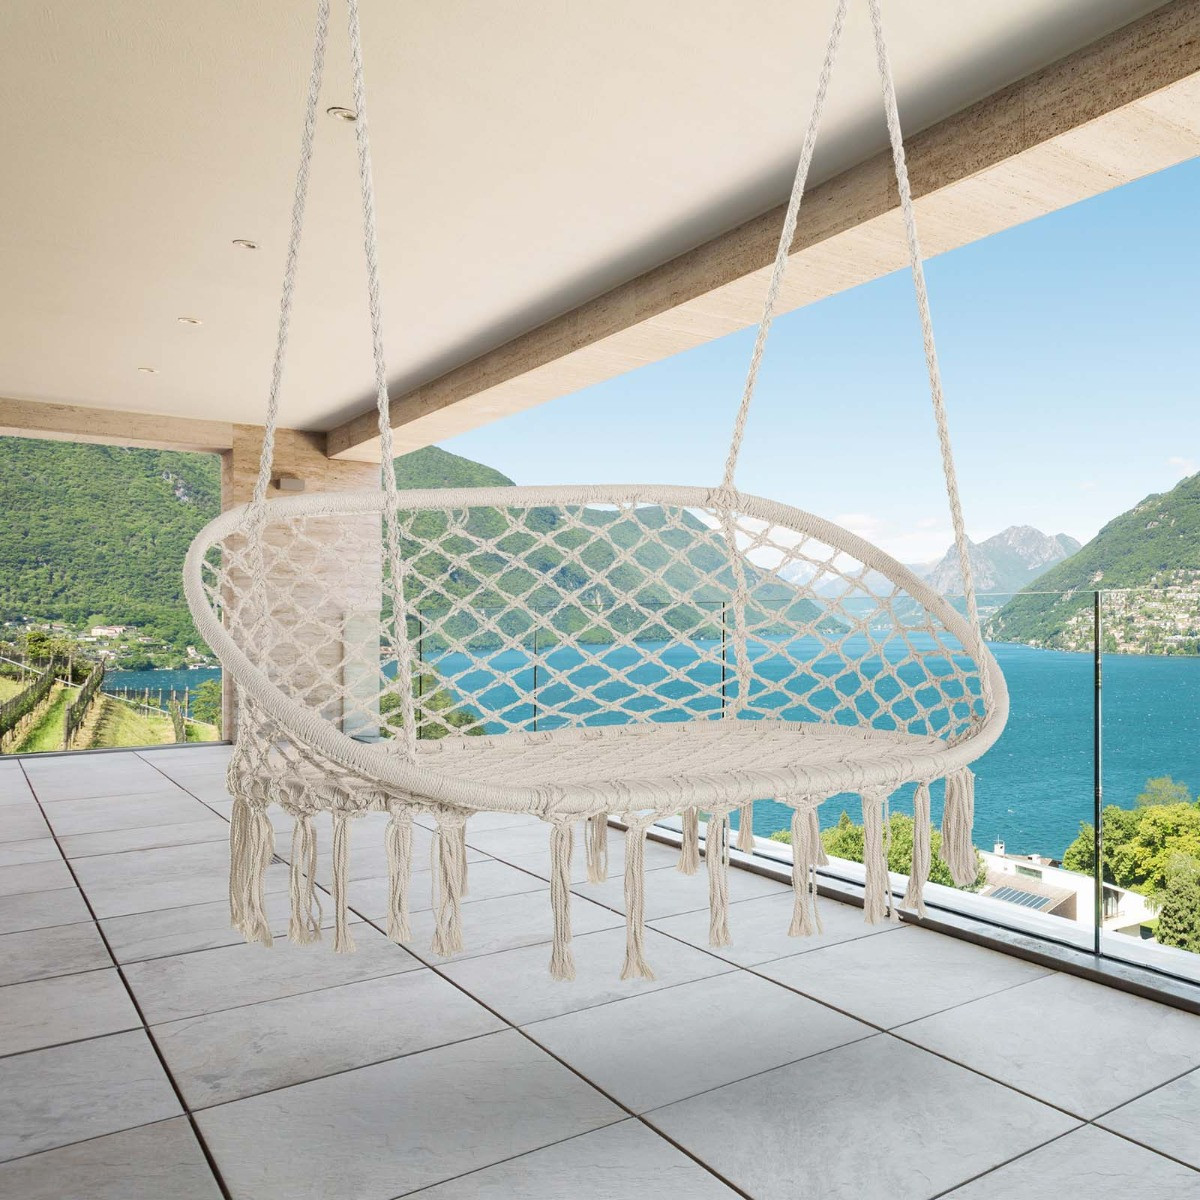 Outsunny 2 Seater Hanging Macrame Hammock Chair - Cream>